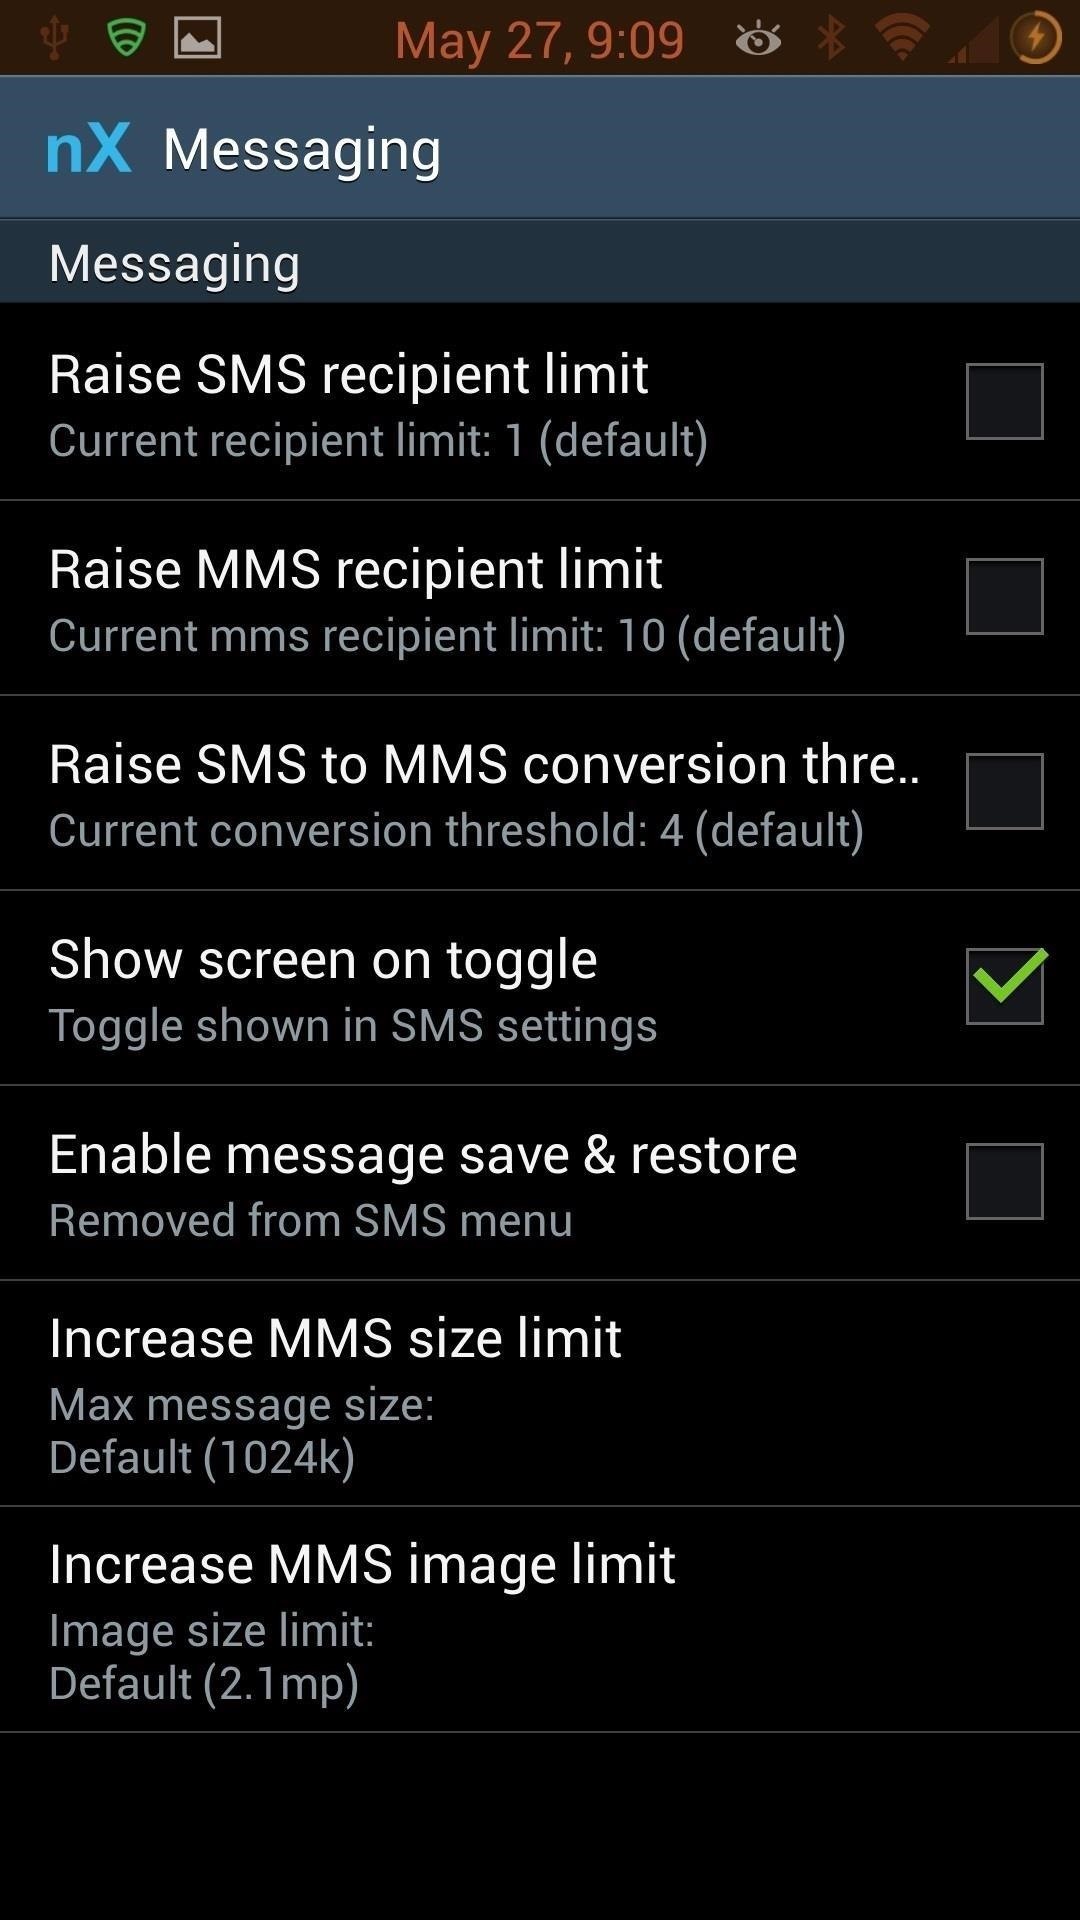 How to Get 70+ SoftMods on Your Samsung Galaxy S4 for No-Fuss Customization at Your Fingertips